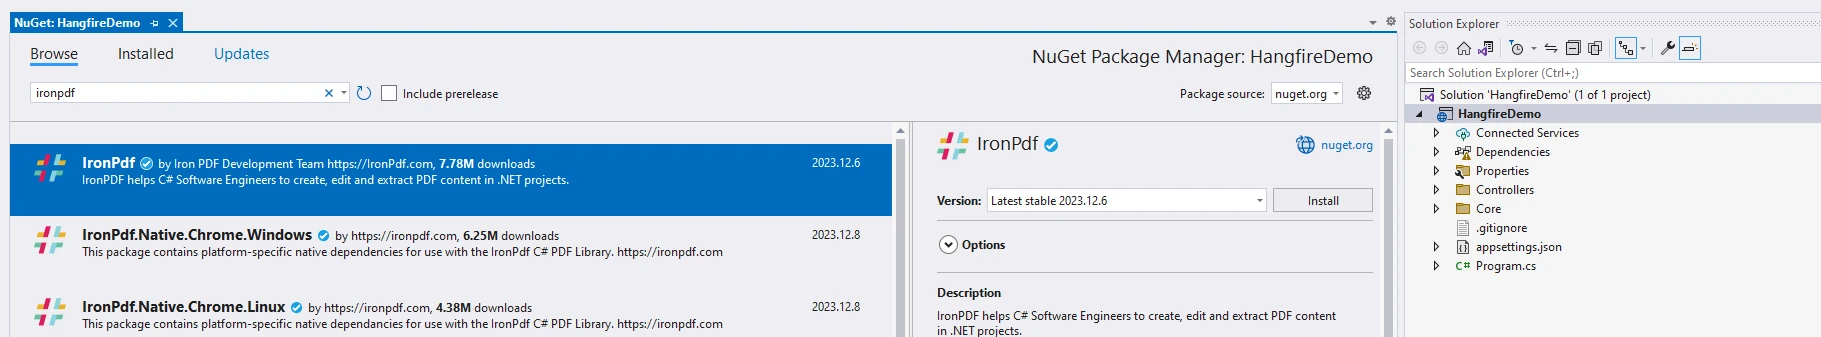 C# Nameof (How It Works For Developers): Figure 2 - Install IronPDF using NuGet Package Manager by searching "ironpdf" in the search bar of NuGet Package Manager.